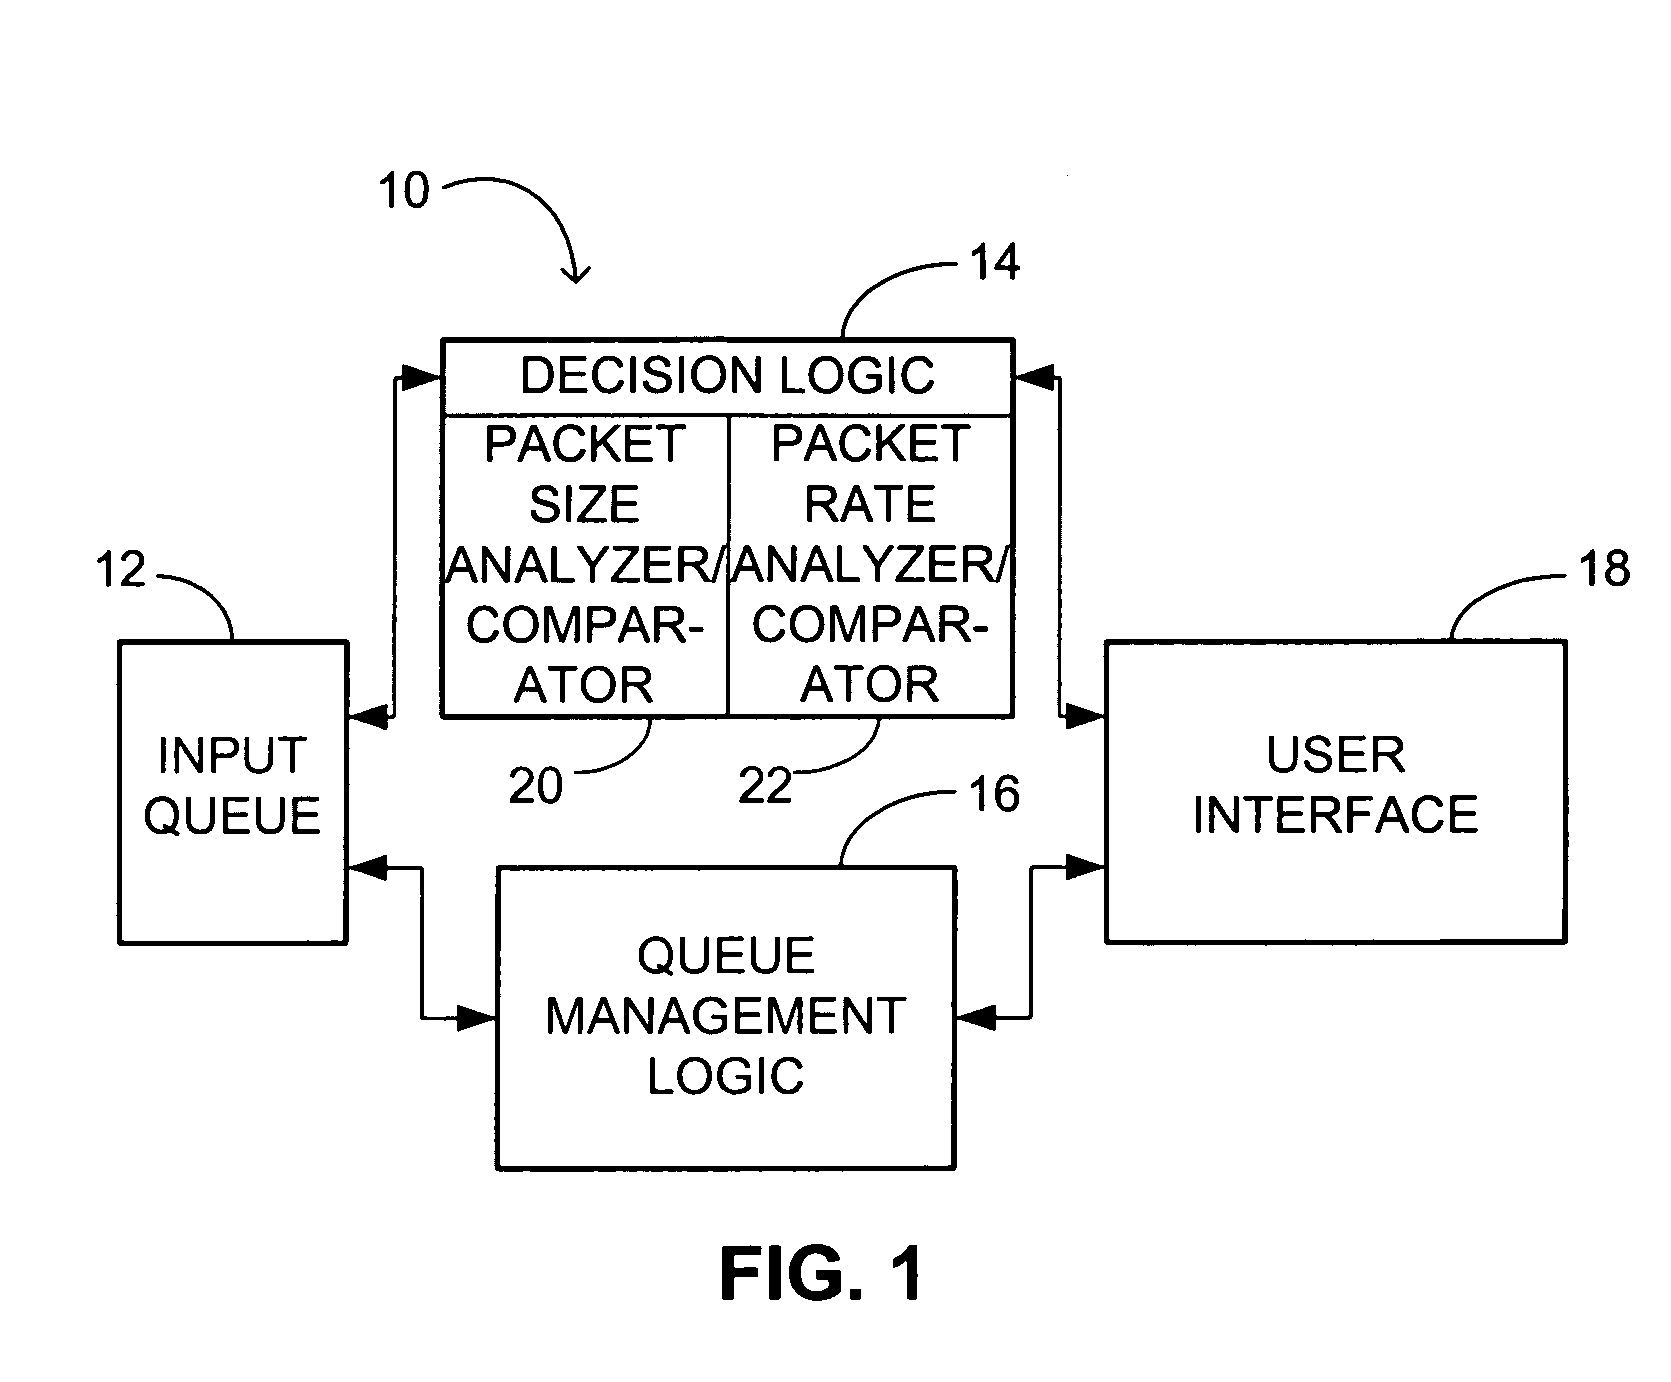 Method and apparatus for reducing inbound traffic congestion in a voice frame network